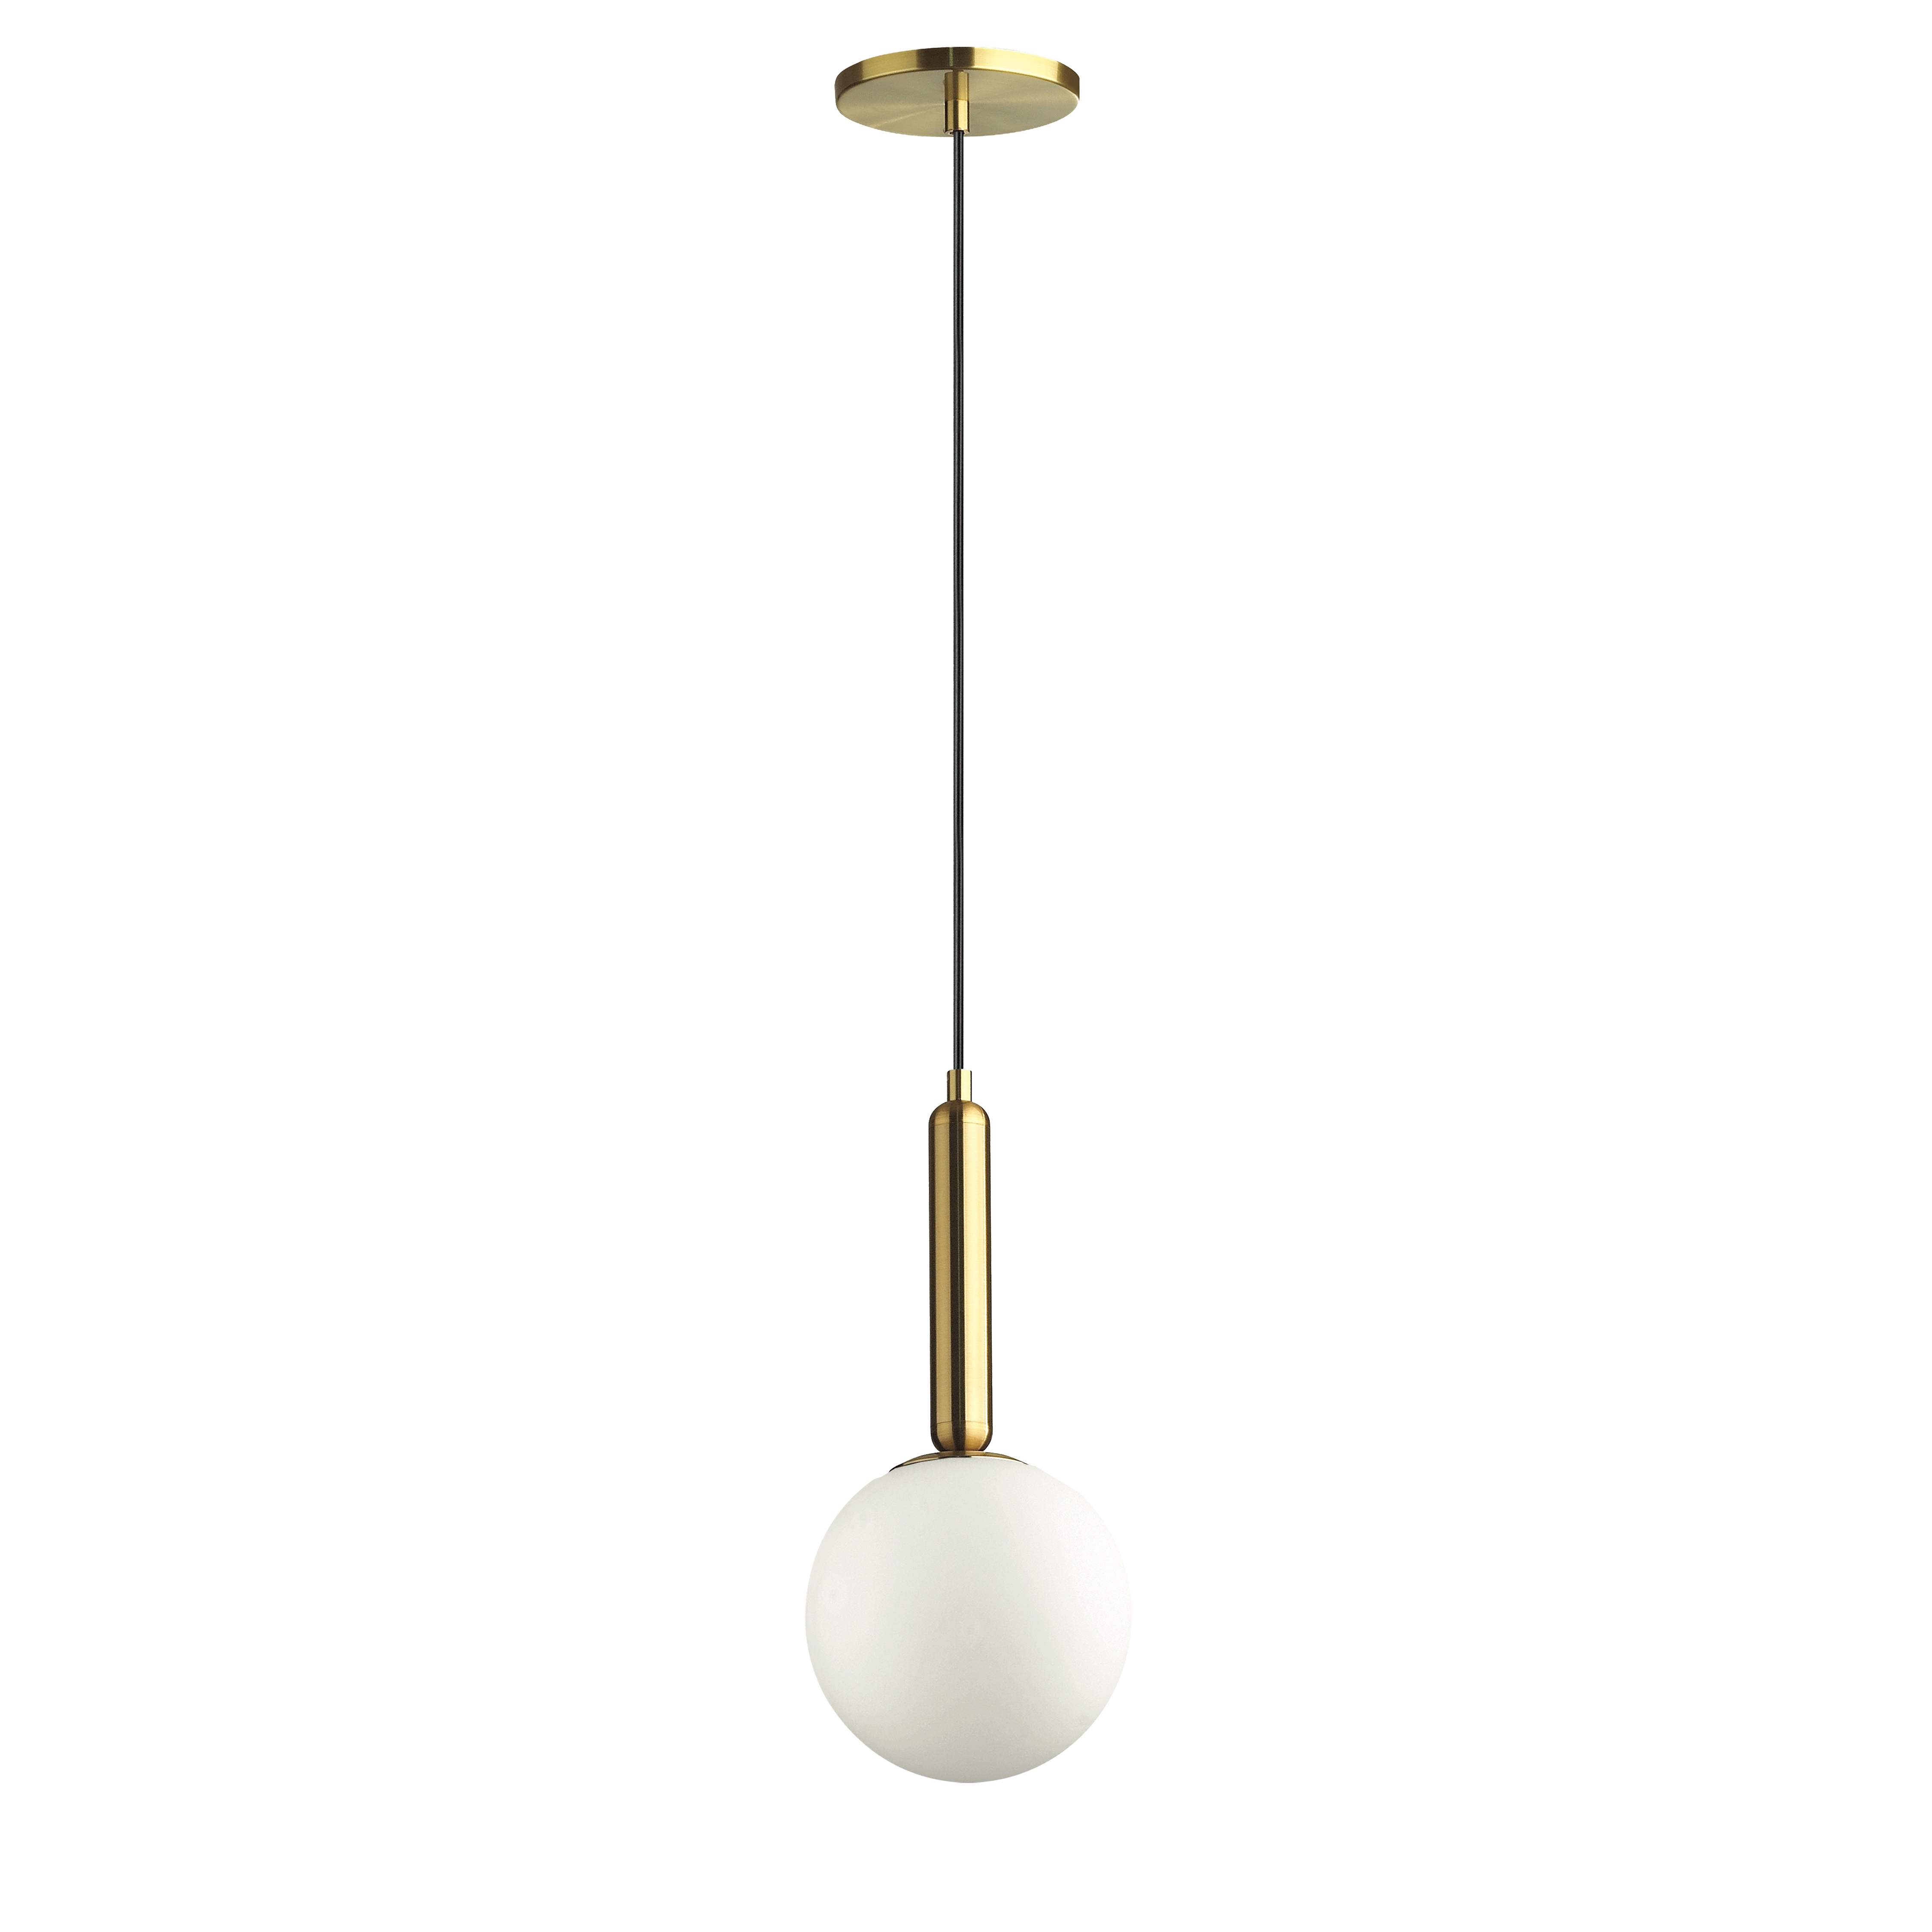 The Tara family of lighting adds a note of eye-catching luxury with a modest footprint that will work in any size room. Variations on the simple theme of a vertical drop with a globe light at the end create a versatile appeal. A simple drop becomes a sturdy cylindrical metal frame/housing. A glass globe contains the light for a look that's contemporary, with configurations that include hammered glass for an intriguing finish. Tara lighting adds a graceful touch to hallways, kitchens and dinettes.